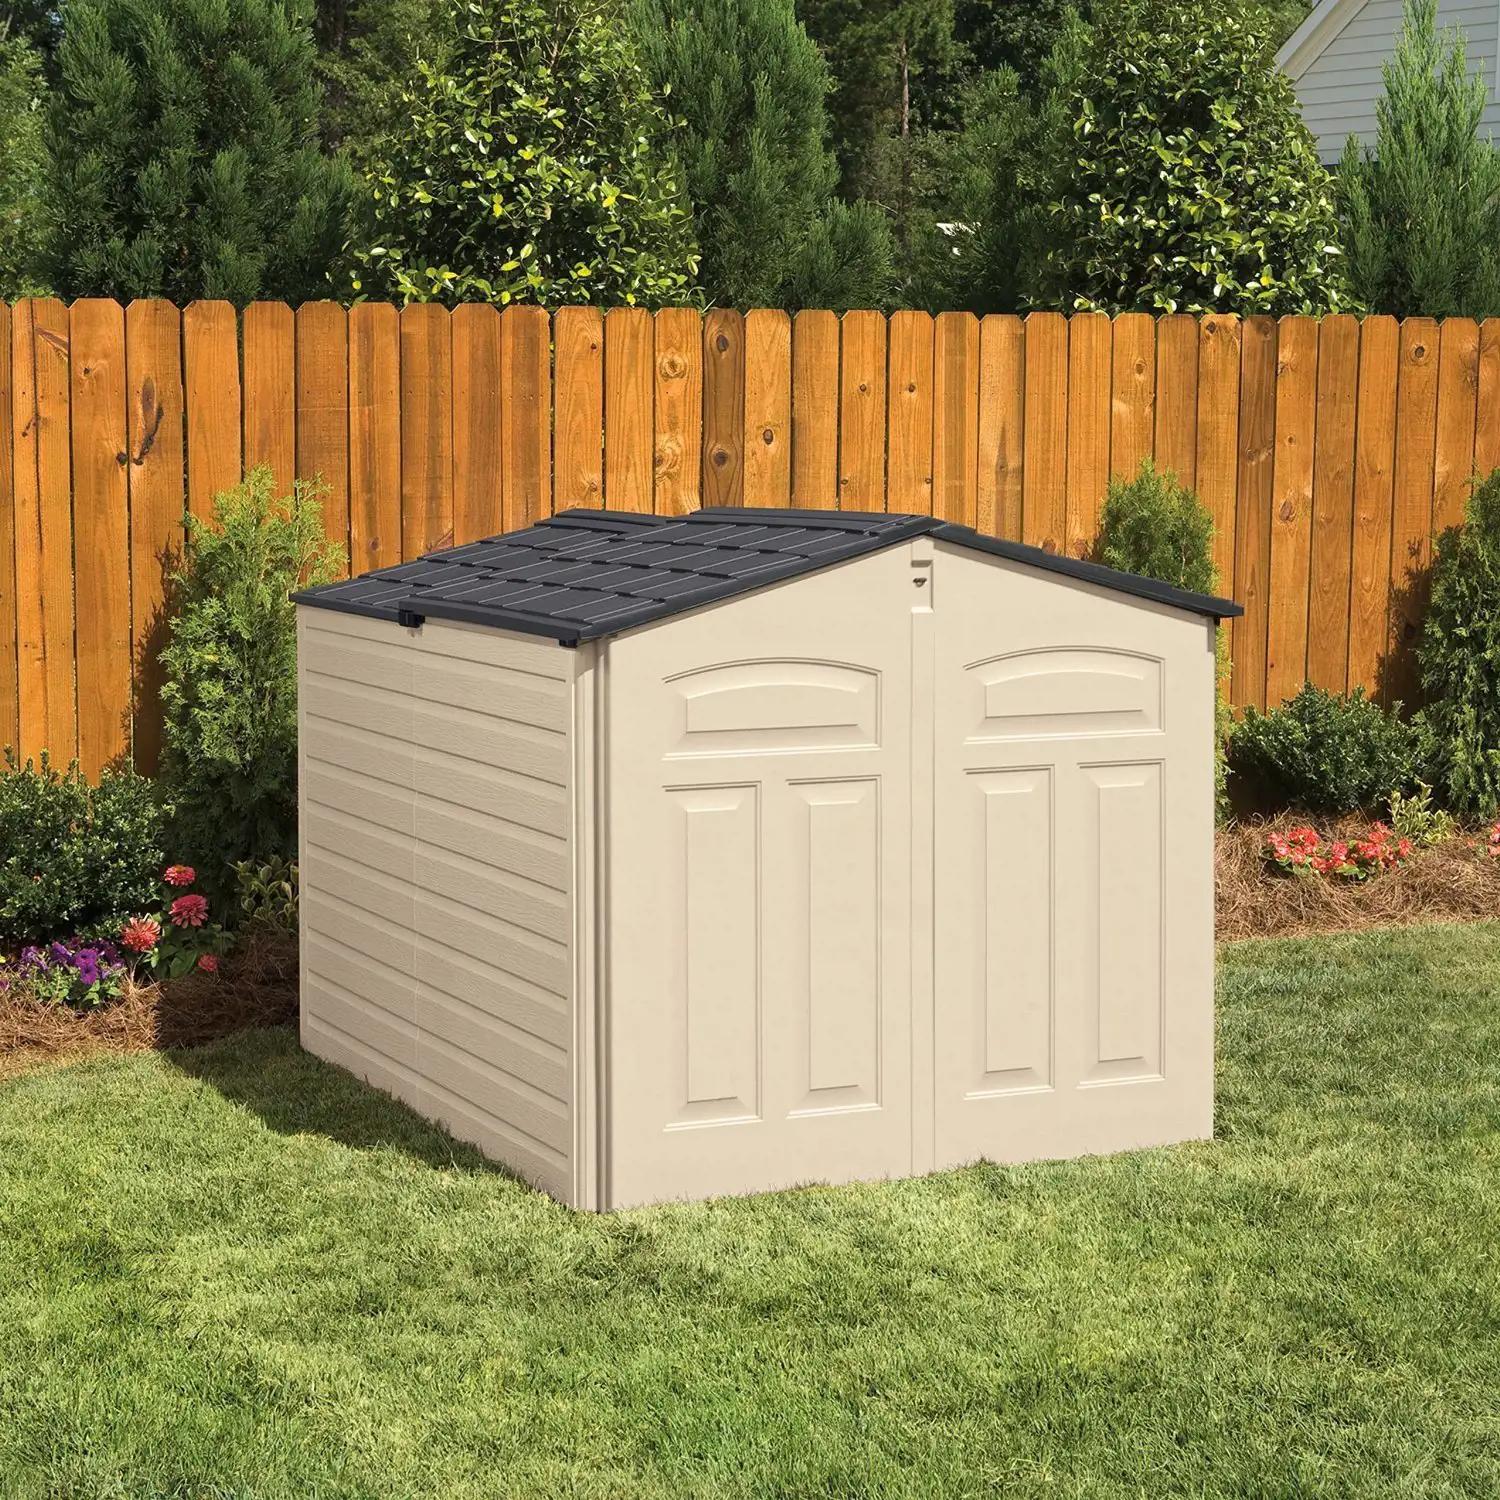 Rubbermaid 96 Cubic Feet Low Profile Slide Lid Outdoor Storage Shed